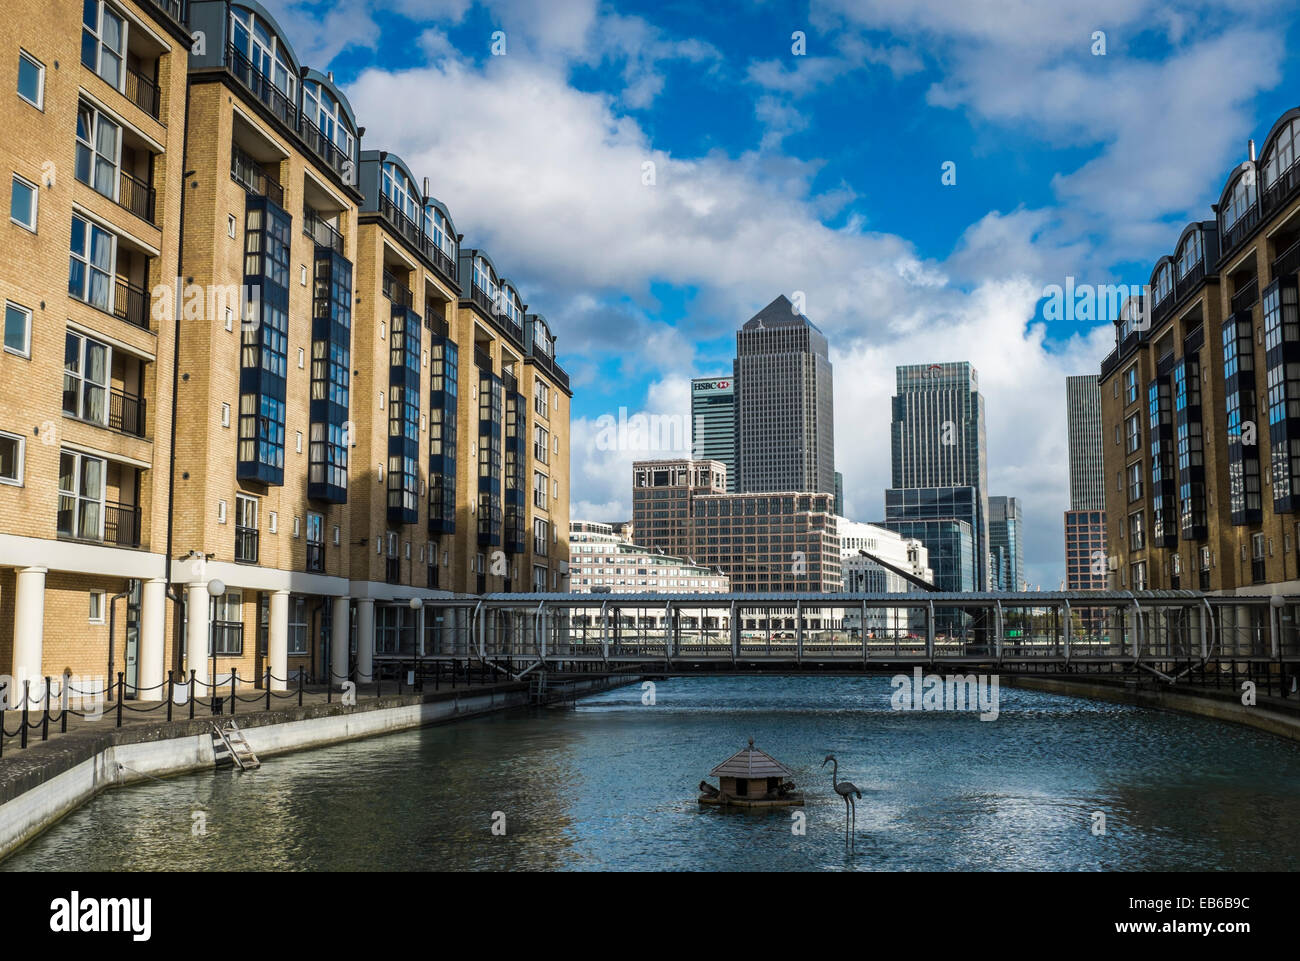 Late afternoon shot of Canary Wharf taken from the south side of the River Thames in Rotherhithe. Stock Photo